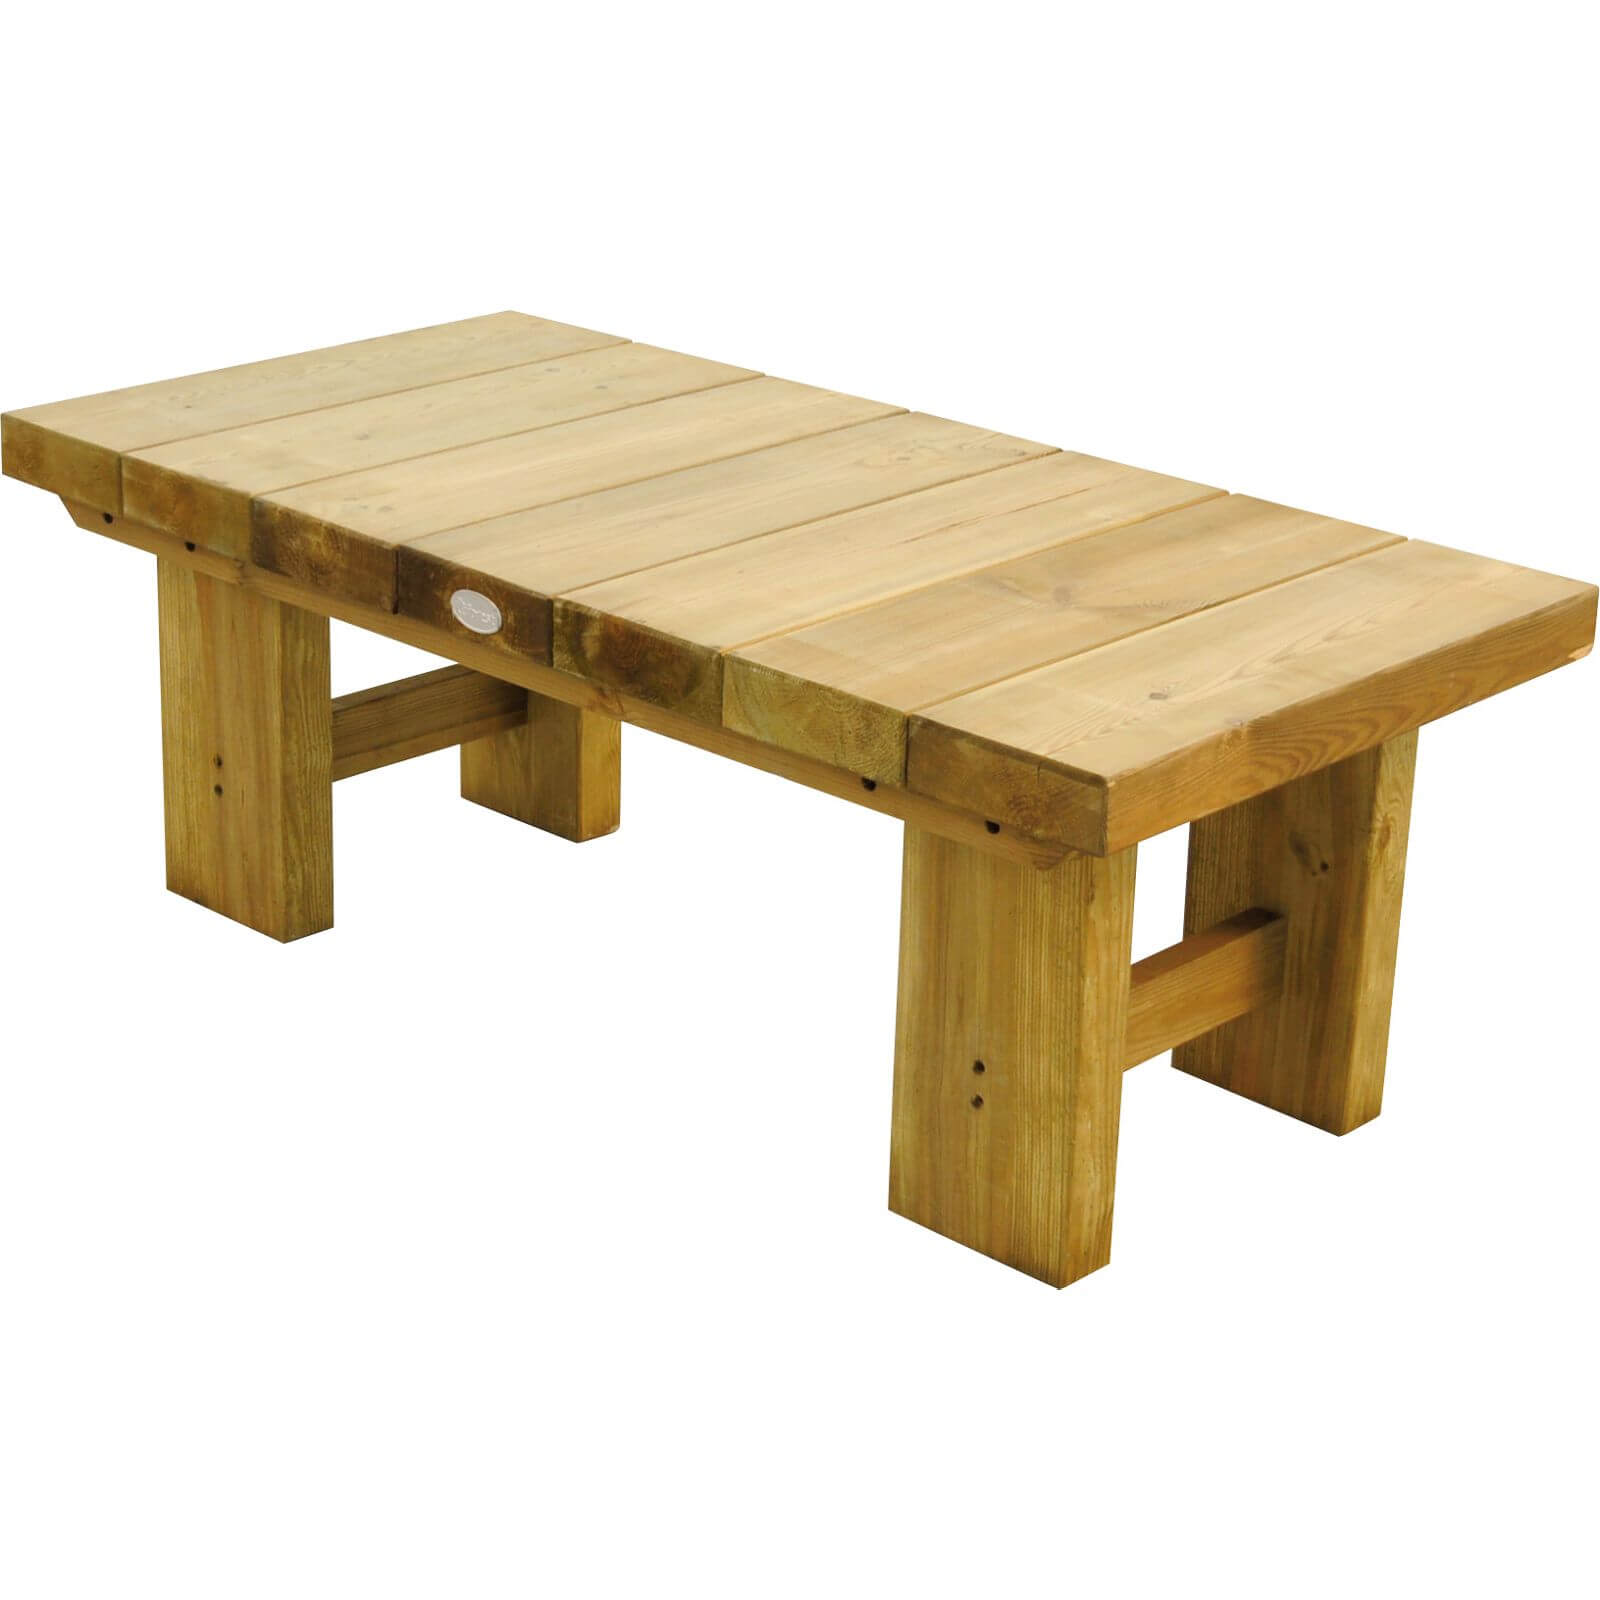 Forest Low Level Wooden Sleeper Table - Natural - 1.2m